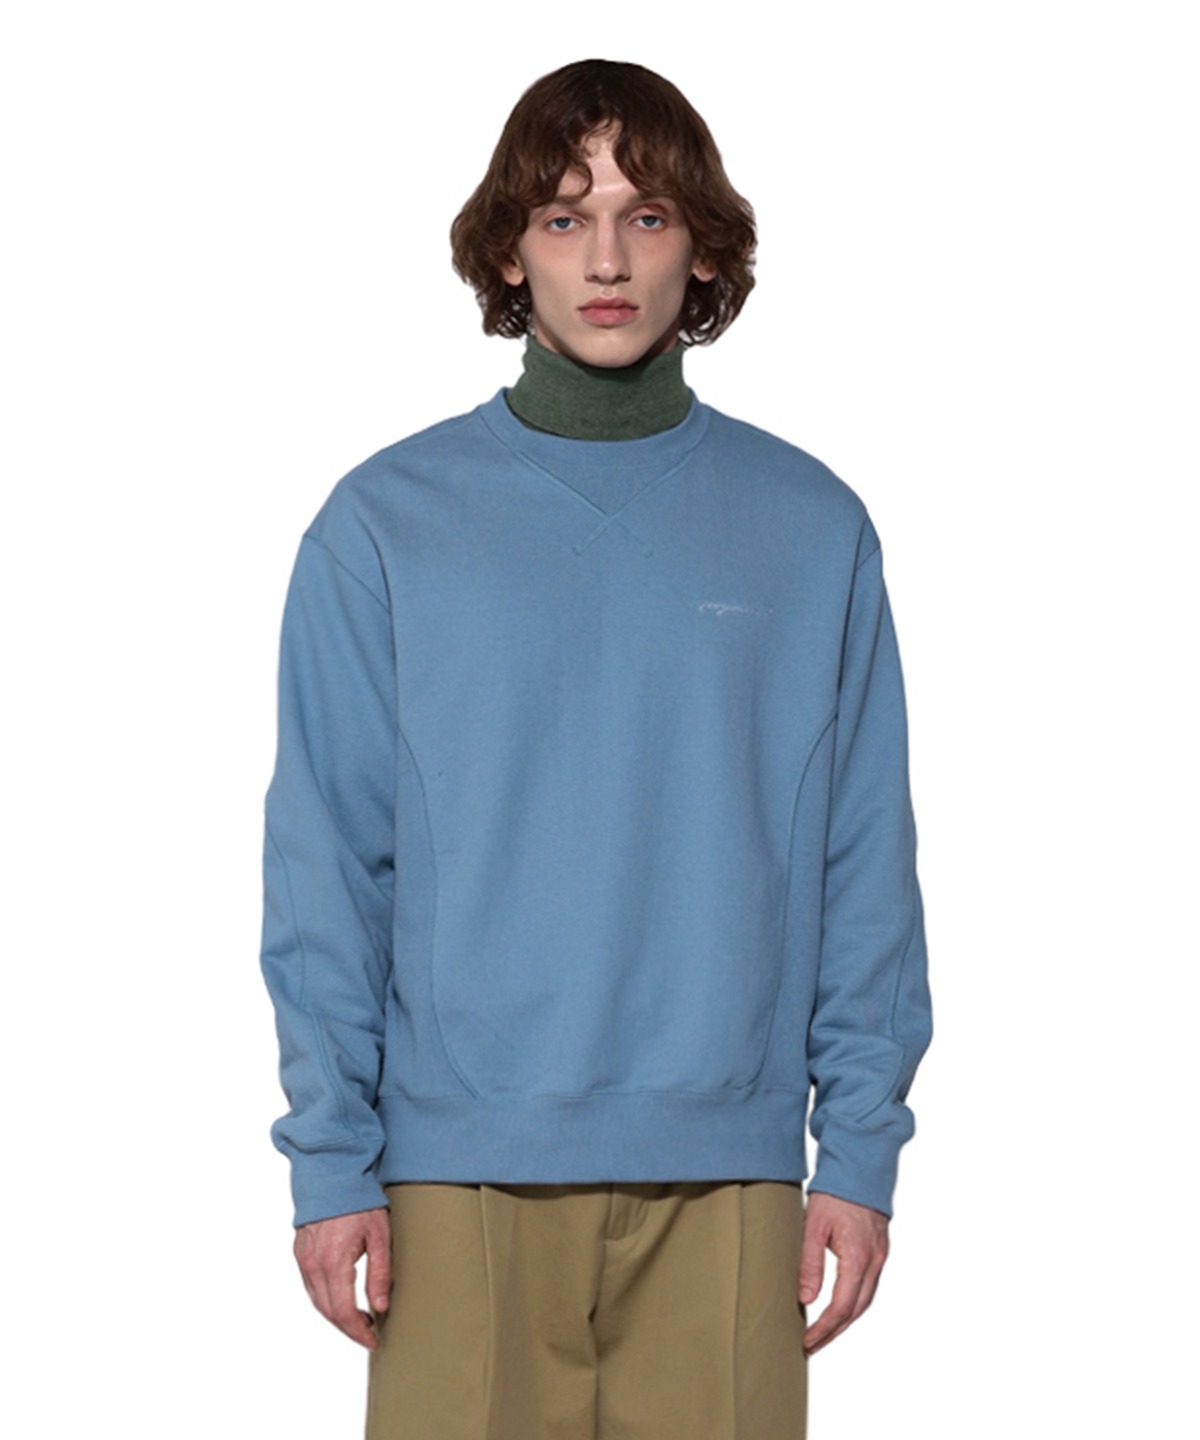 Curved Section Contras Sweatshirt -Sky Blue